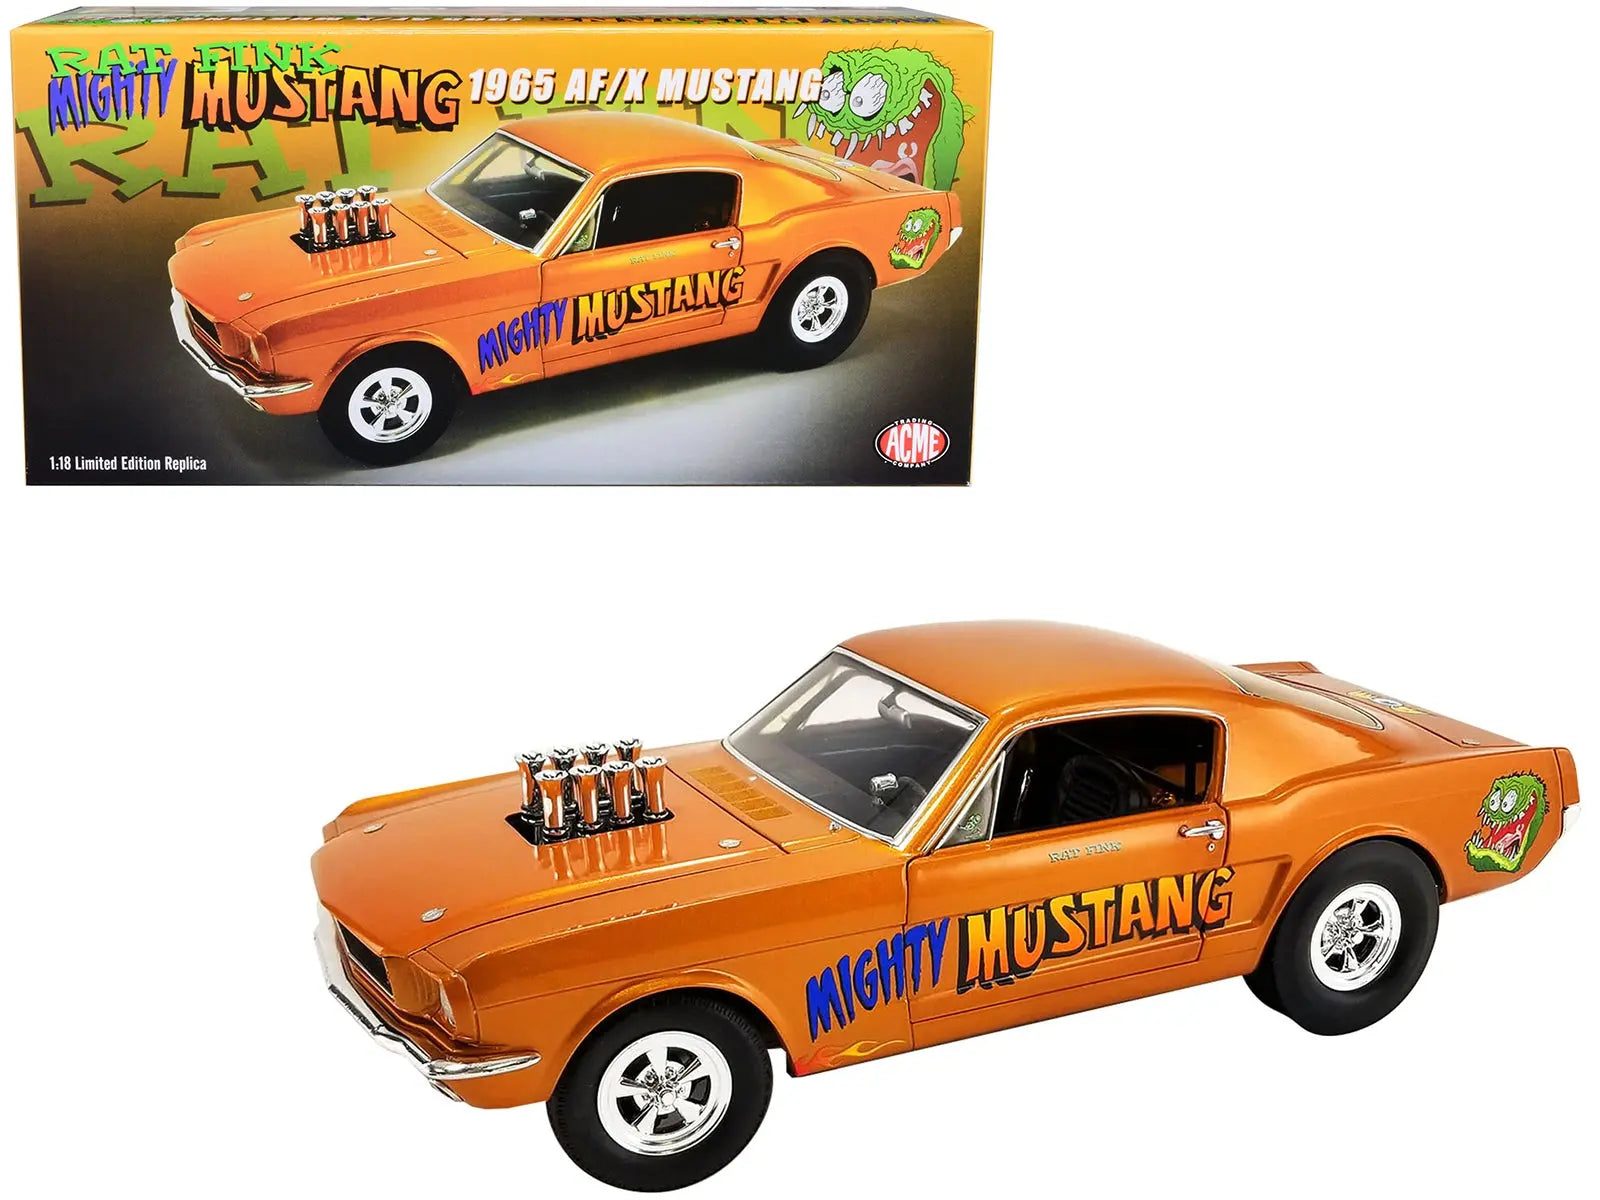 1965 Ford Mustang A/FX Orange Metallic "Rat Fink Mighty Mustang" Limited Edition to 1122 pieces Worldwide 1/18 Diecast Model Car by ACME Acme